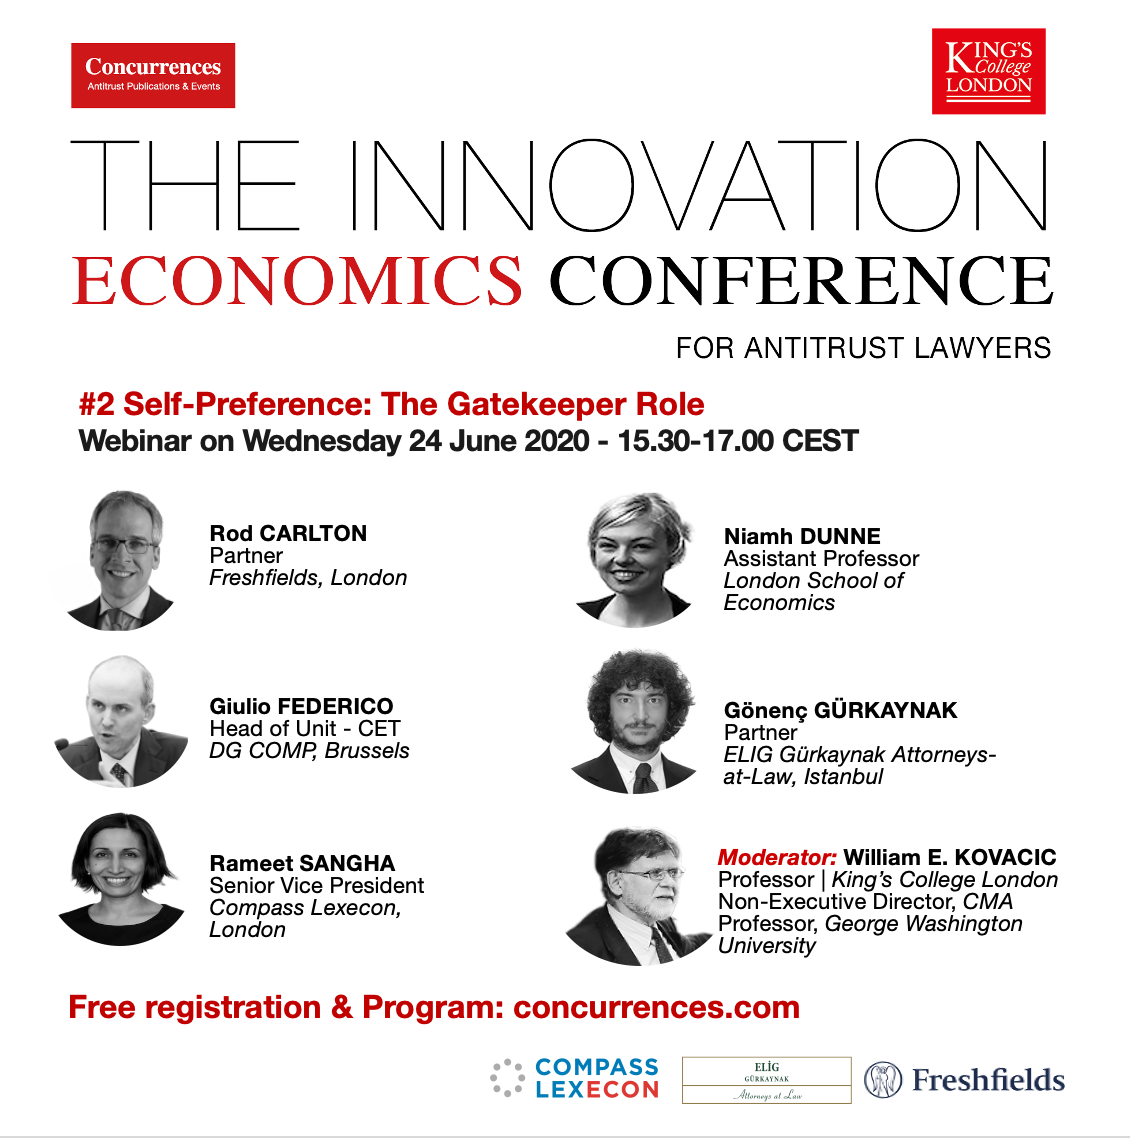 Mr. Gönenç Gürkaynak, our Founding Partner and head of competition law and regulatory team, will be speaking at a panel session entitled “Self-Preference: The Gatekeeper Role” at the upcoming Concurrences 4th Innovation Economics Conference to be held on Wednesday, June 24, 2020 at 15.30 (CEST).